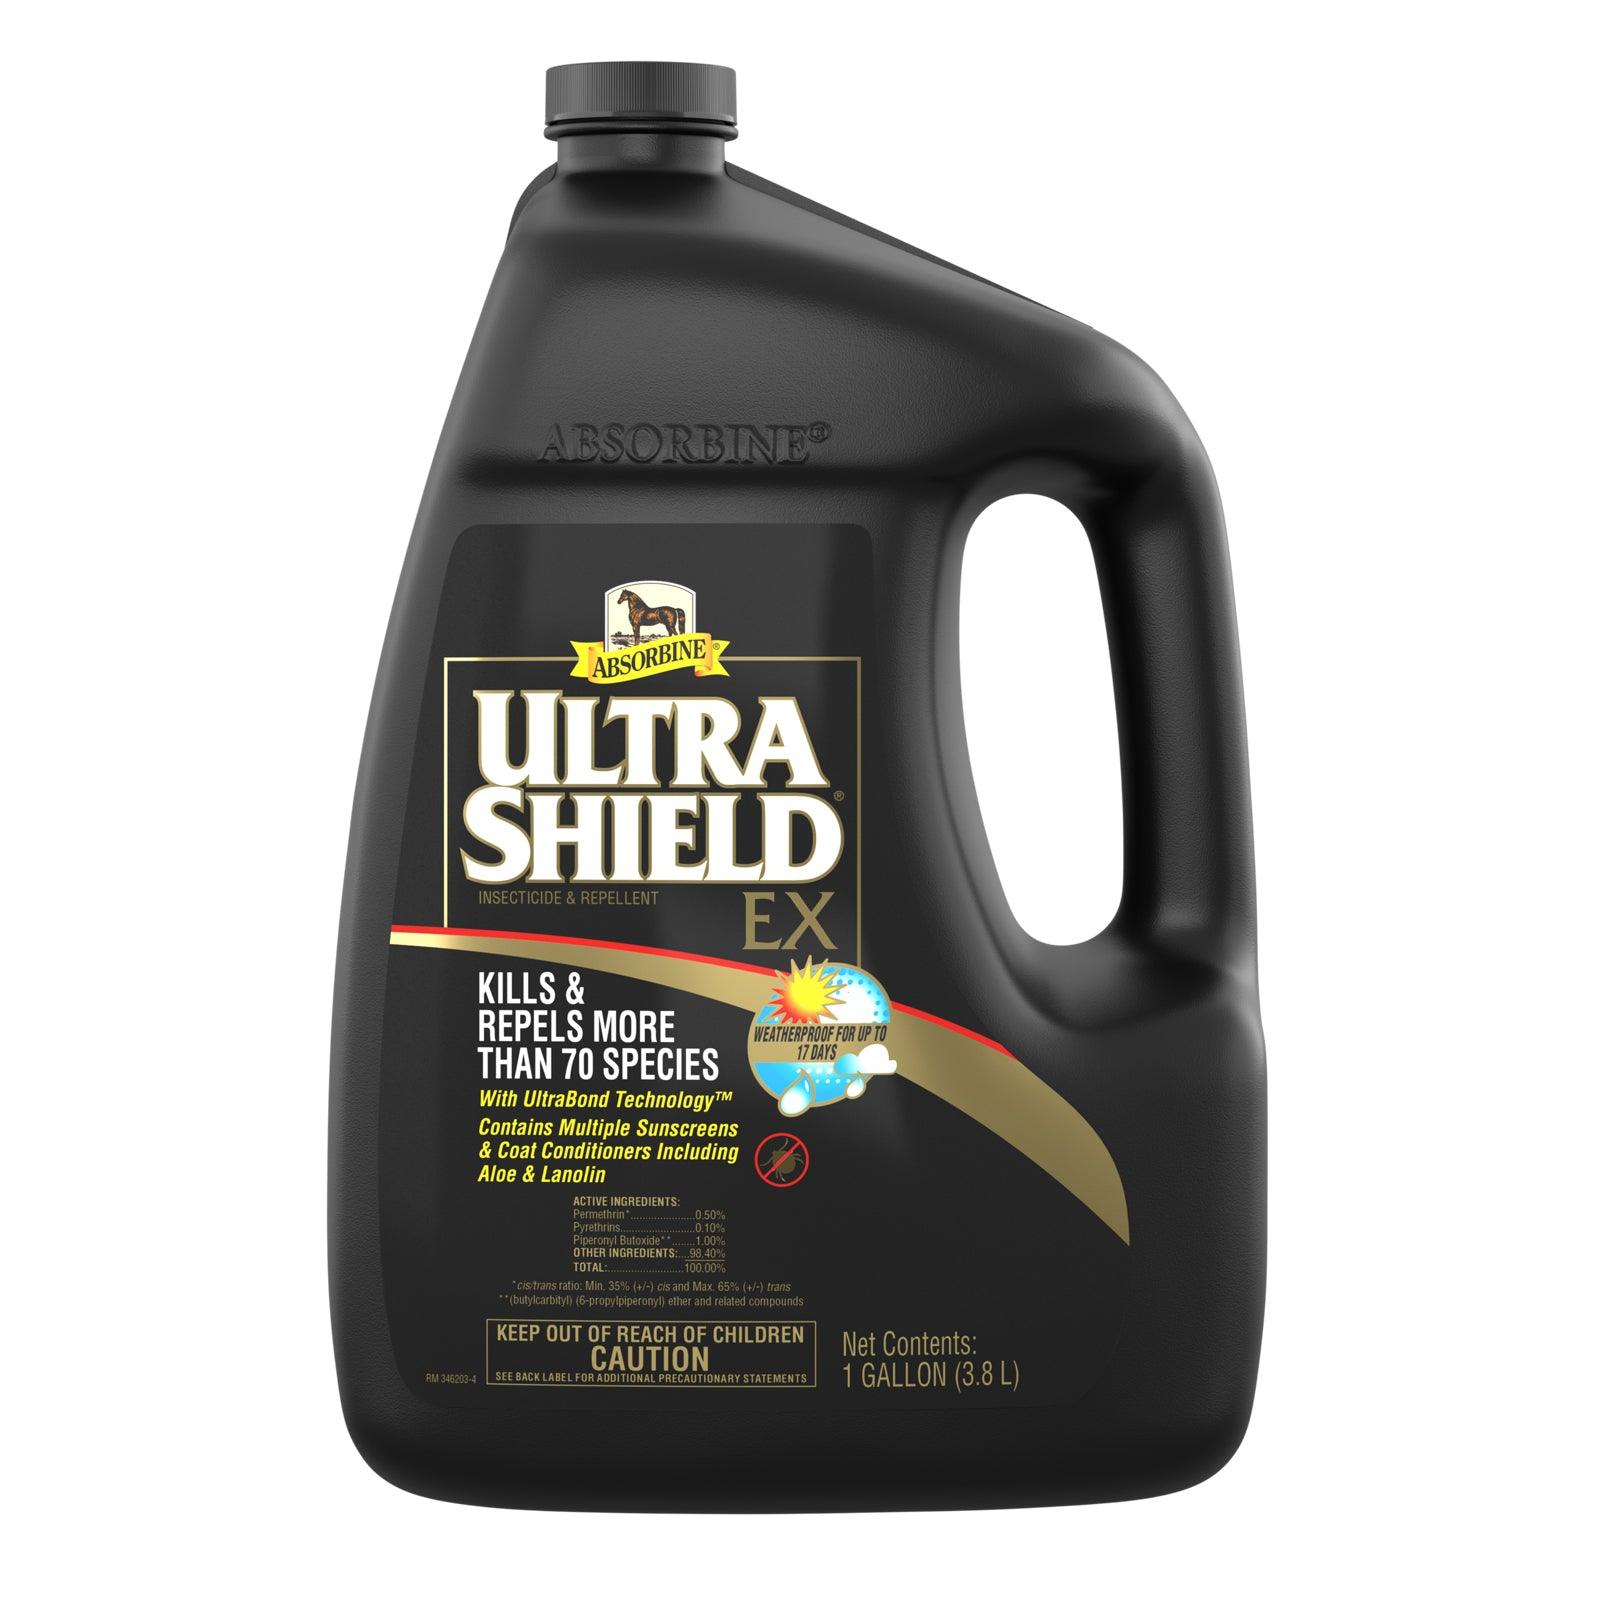 UltraShield EX gallon, kills & repels more than 70 species.  With UltraBond technology.  Contains multiple sunscreens & coat conditioners including aloe & lanolin.